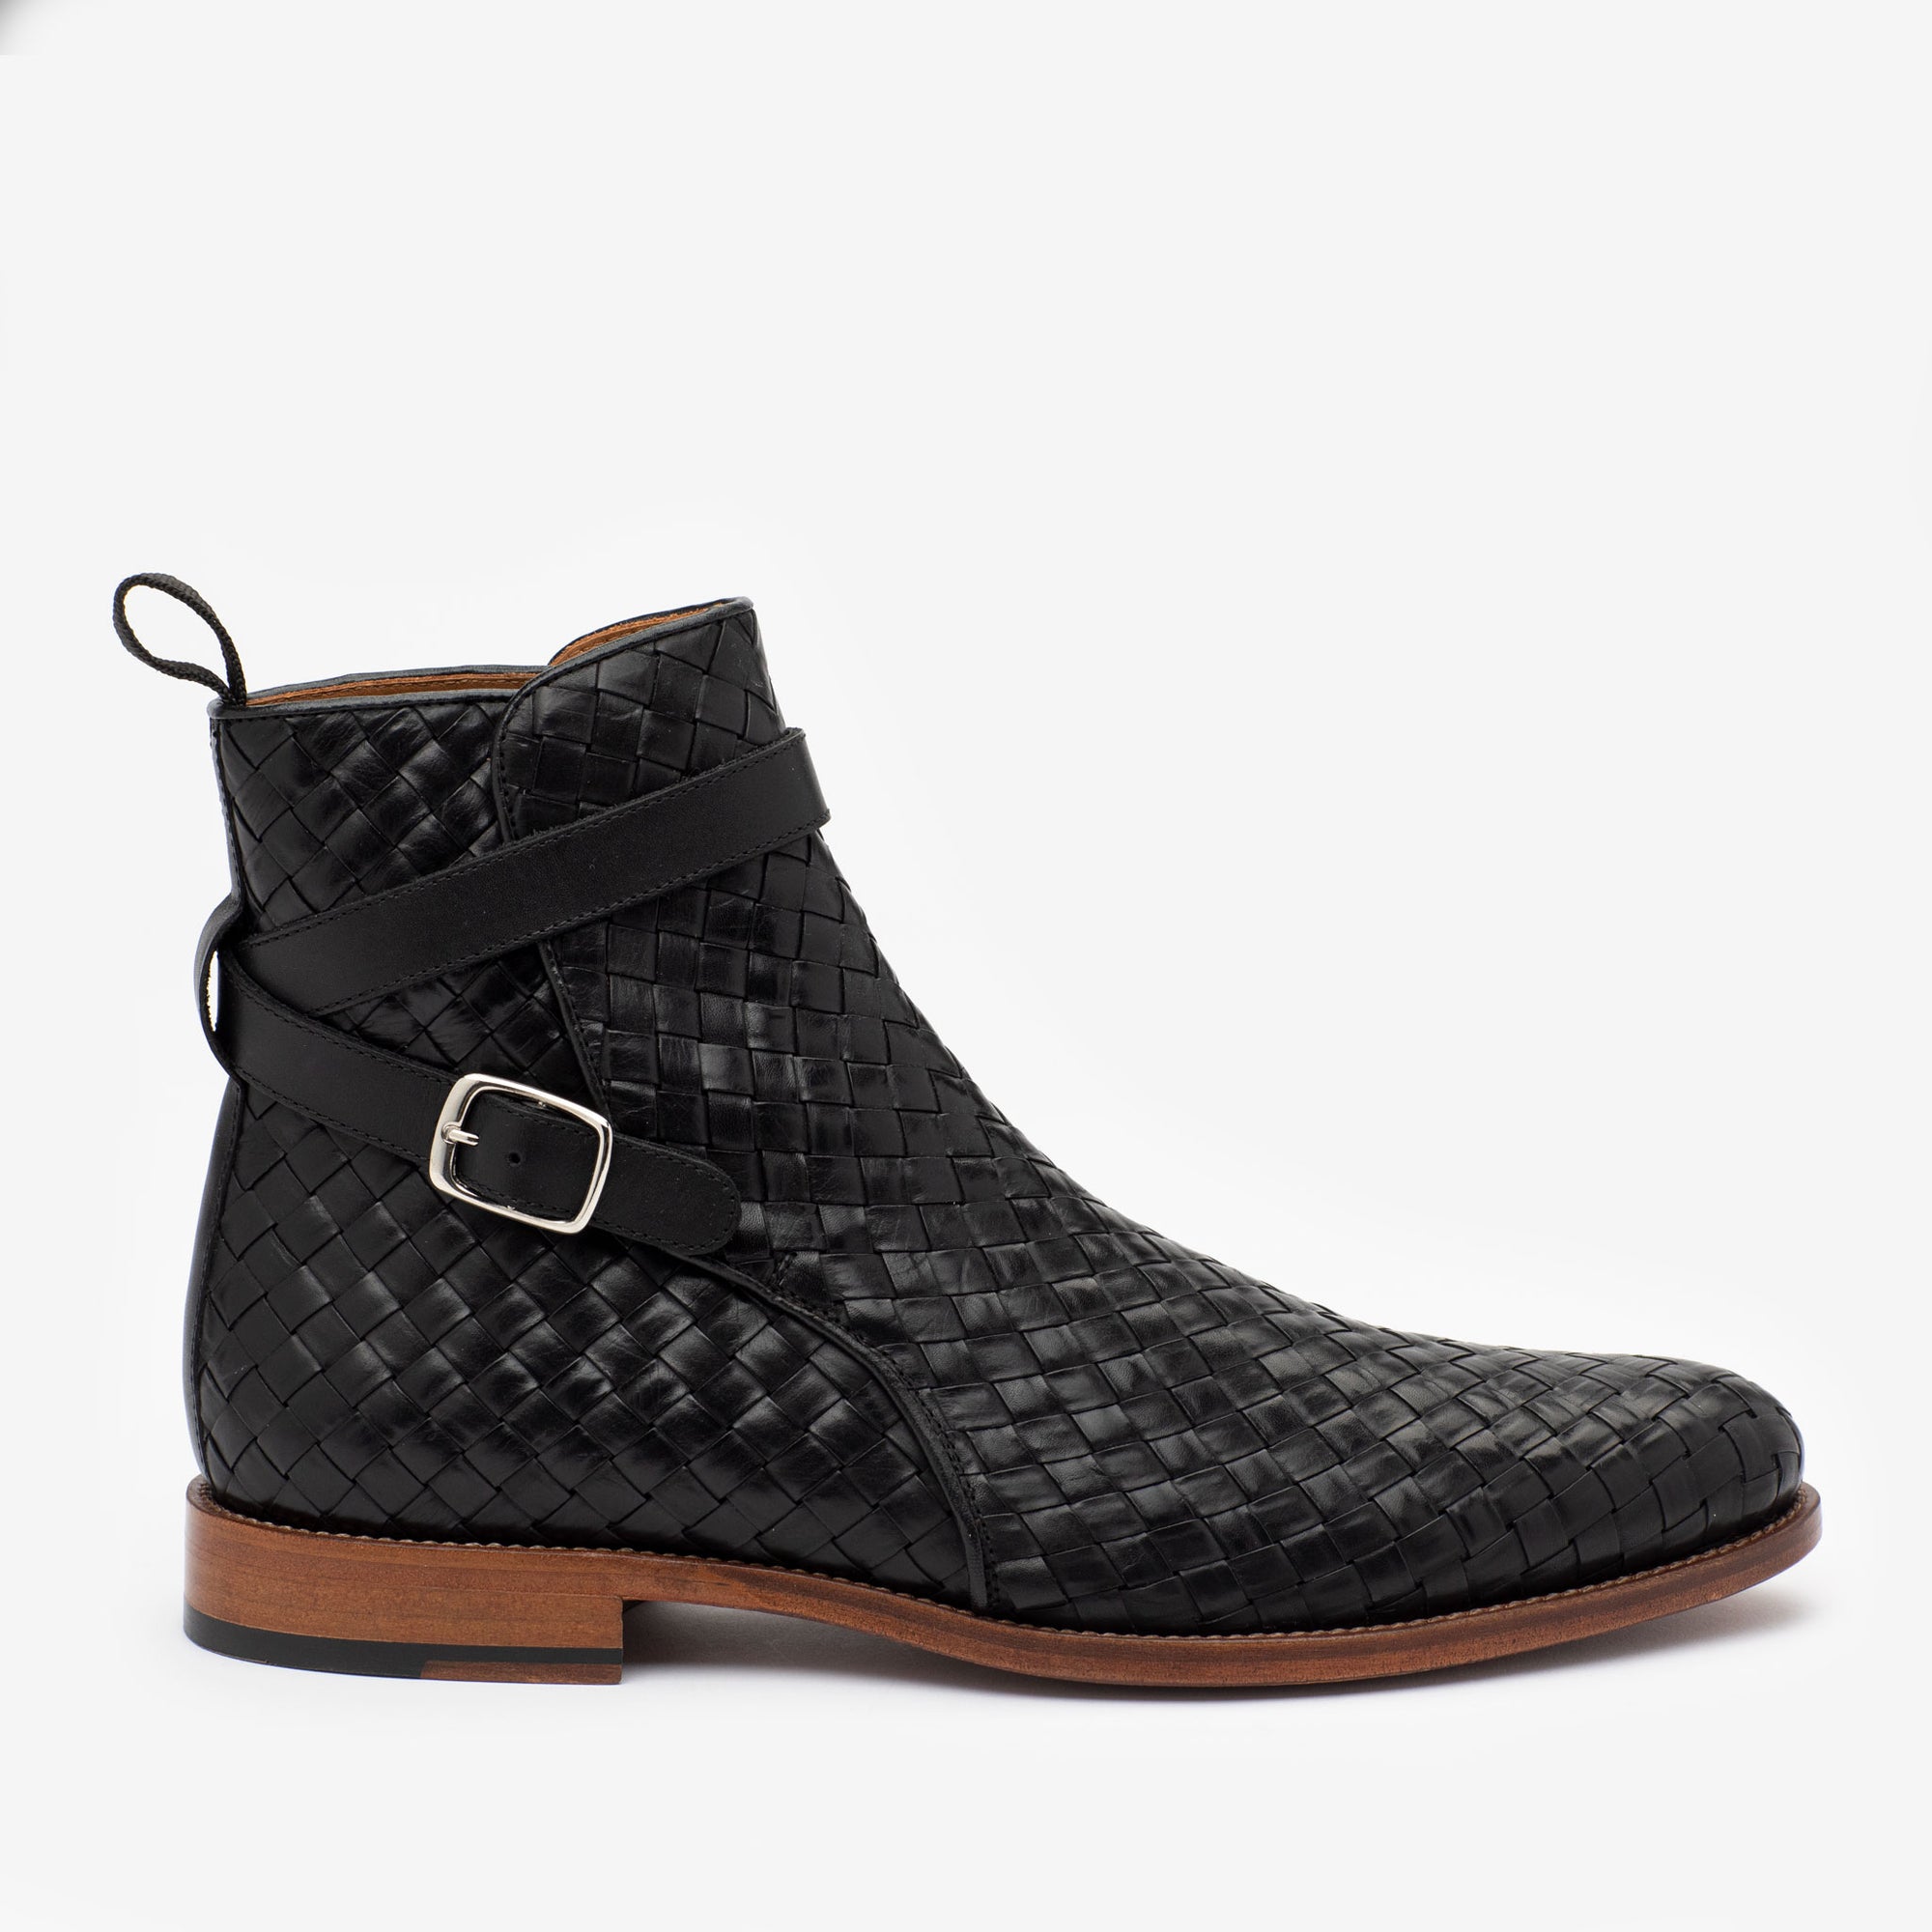 The Dylan Boot in Black Woven